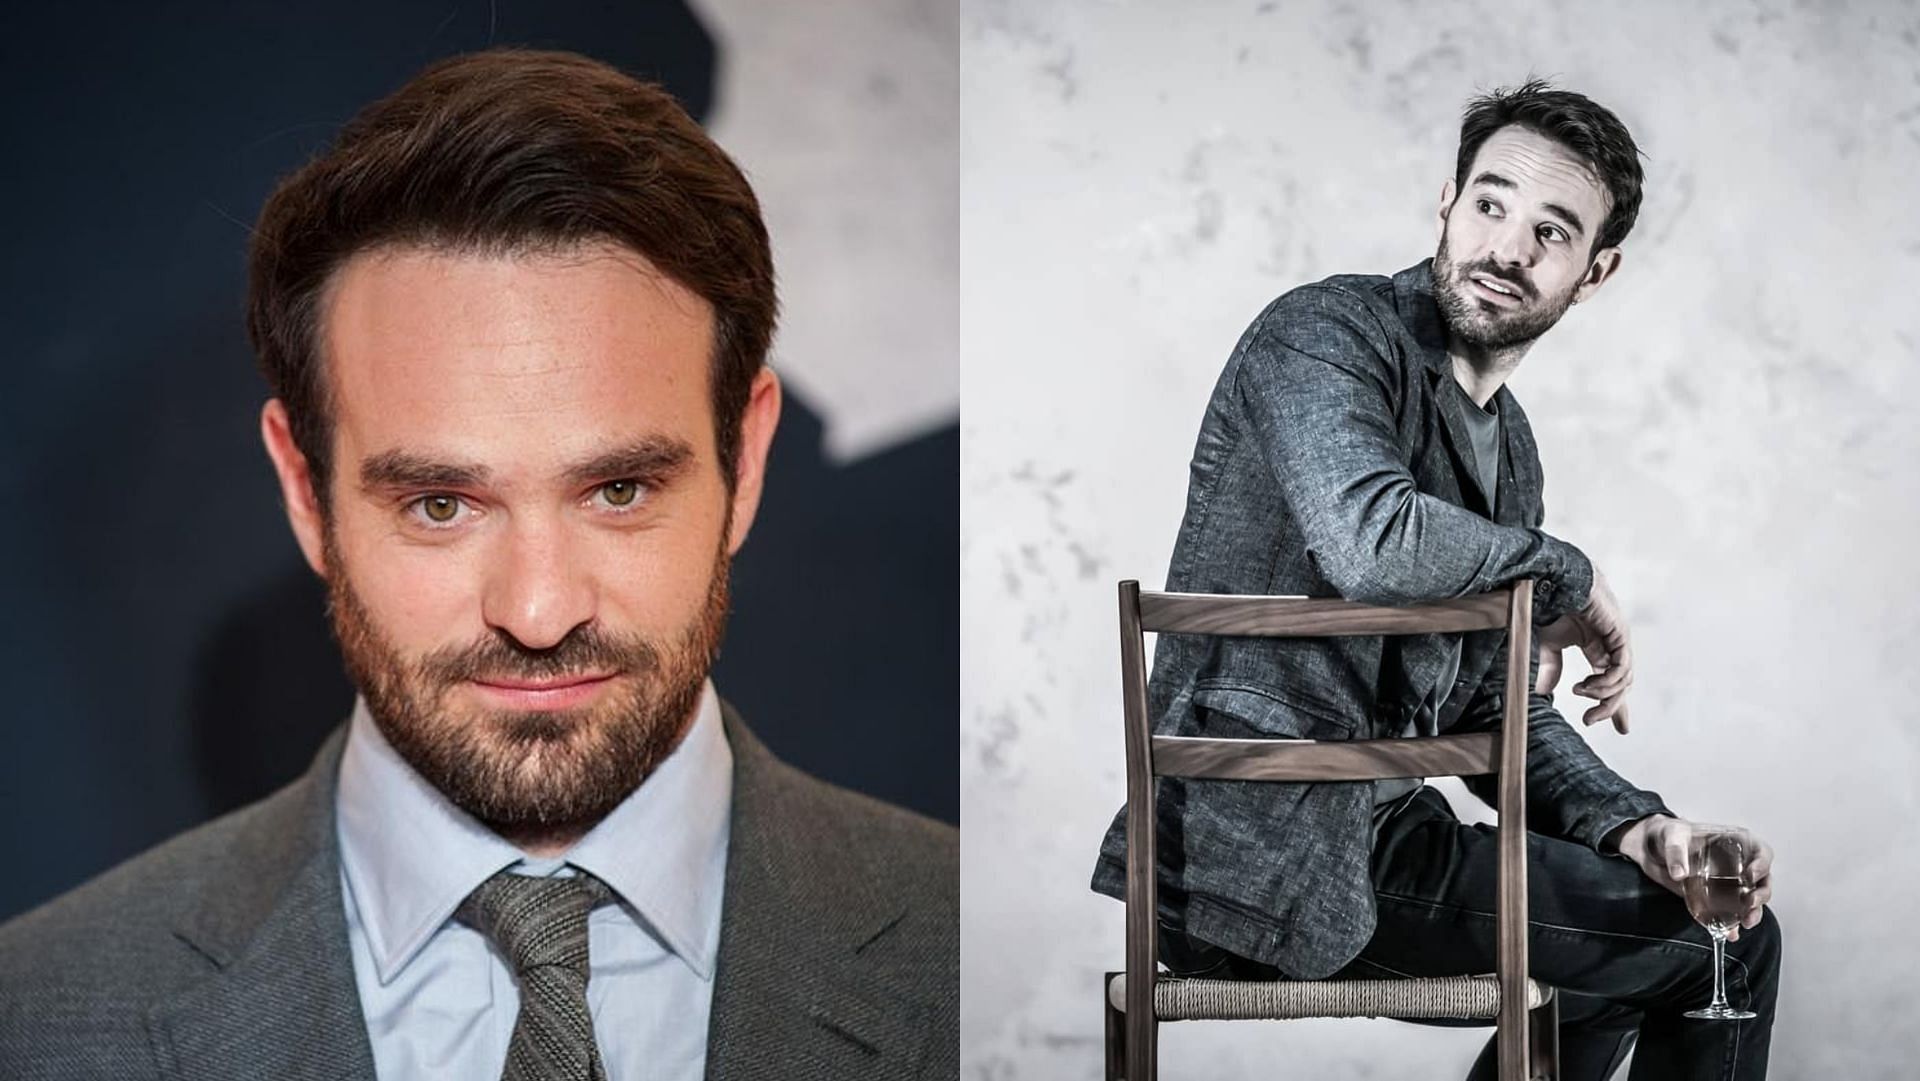 Charlie Cox had to increase his weight to play the lead role in Daredevil (Image via Instagram).